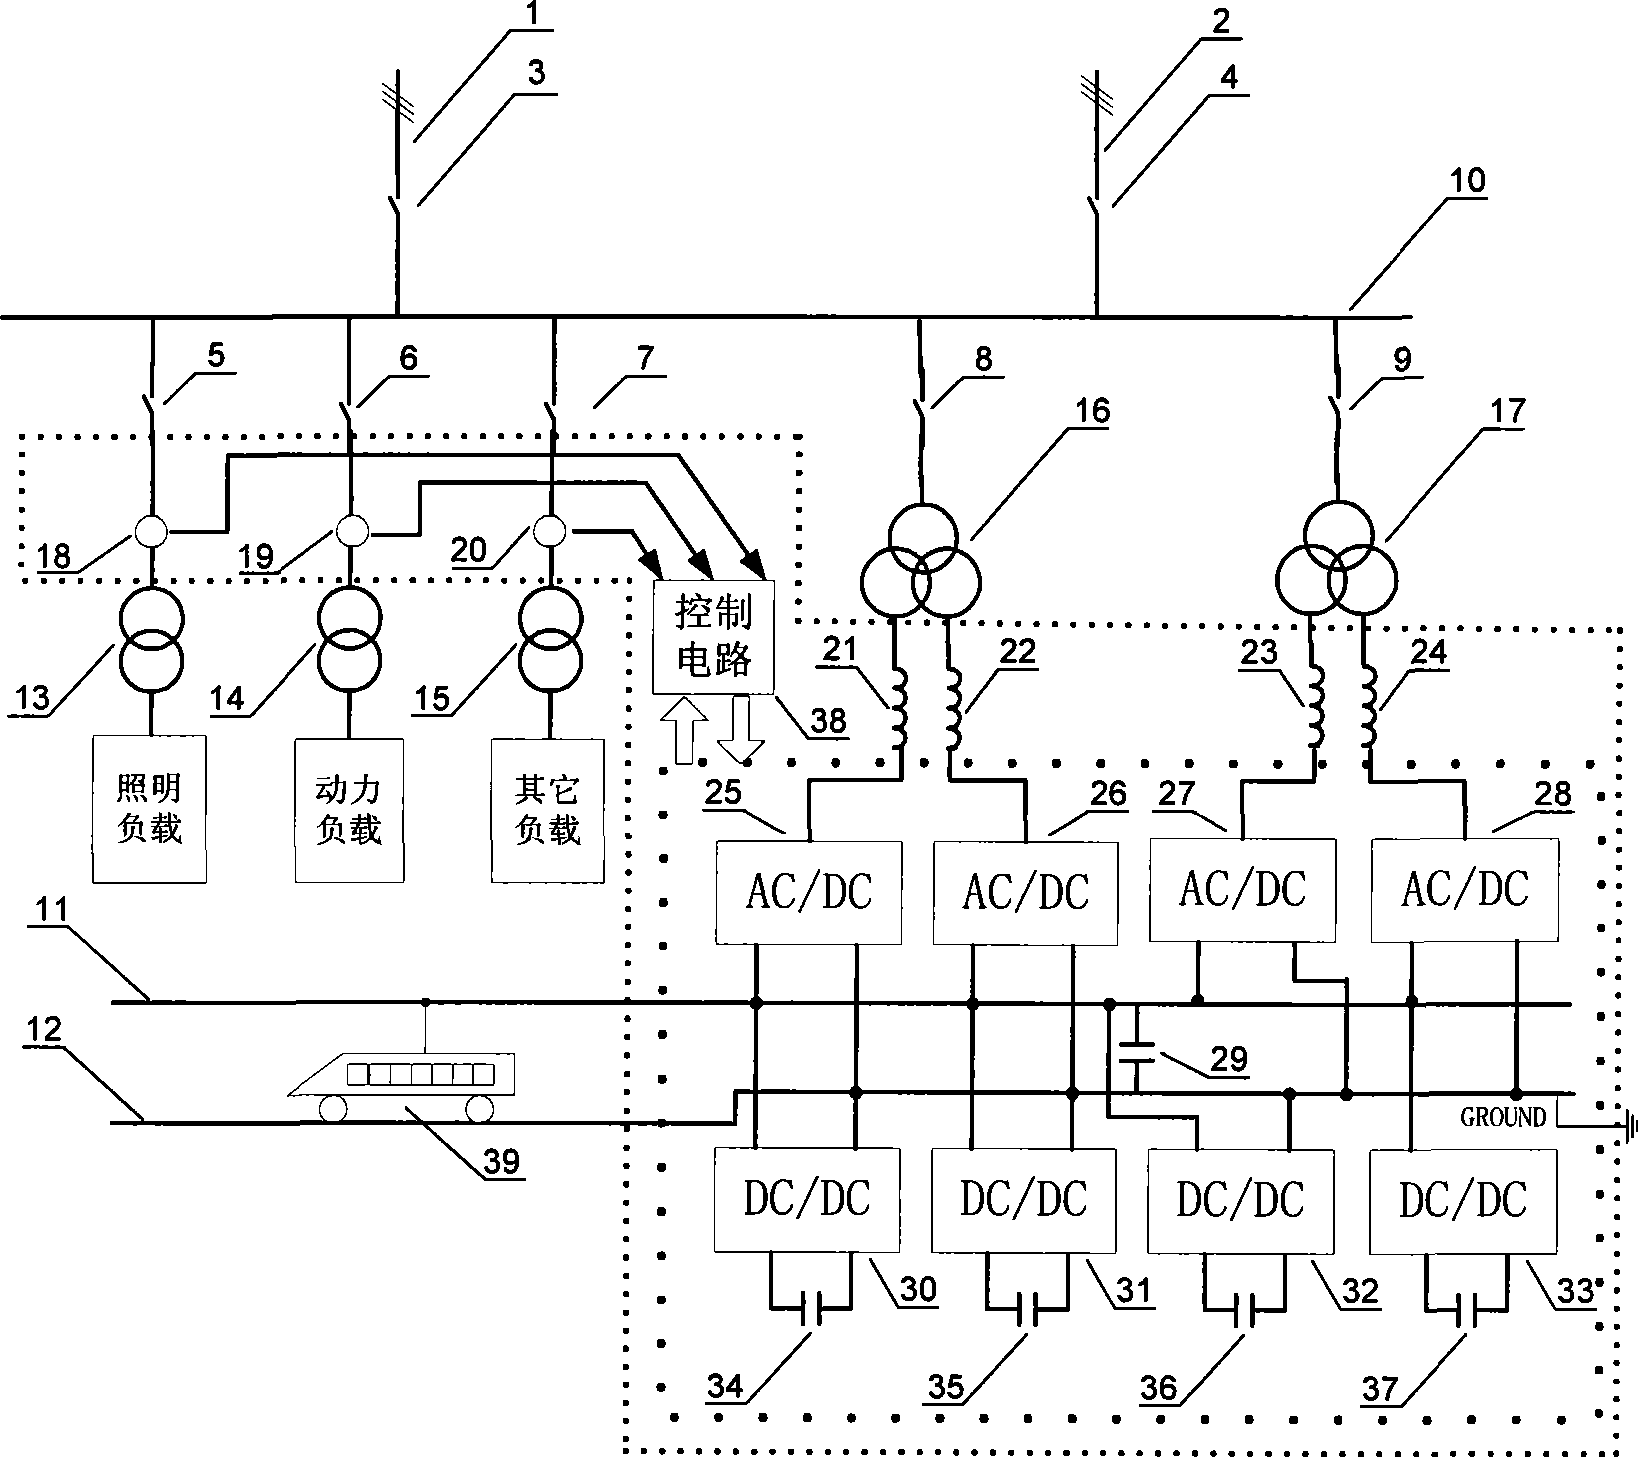 Multiple-target integrated control energy-saving method of electric power supply system for subway